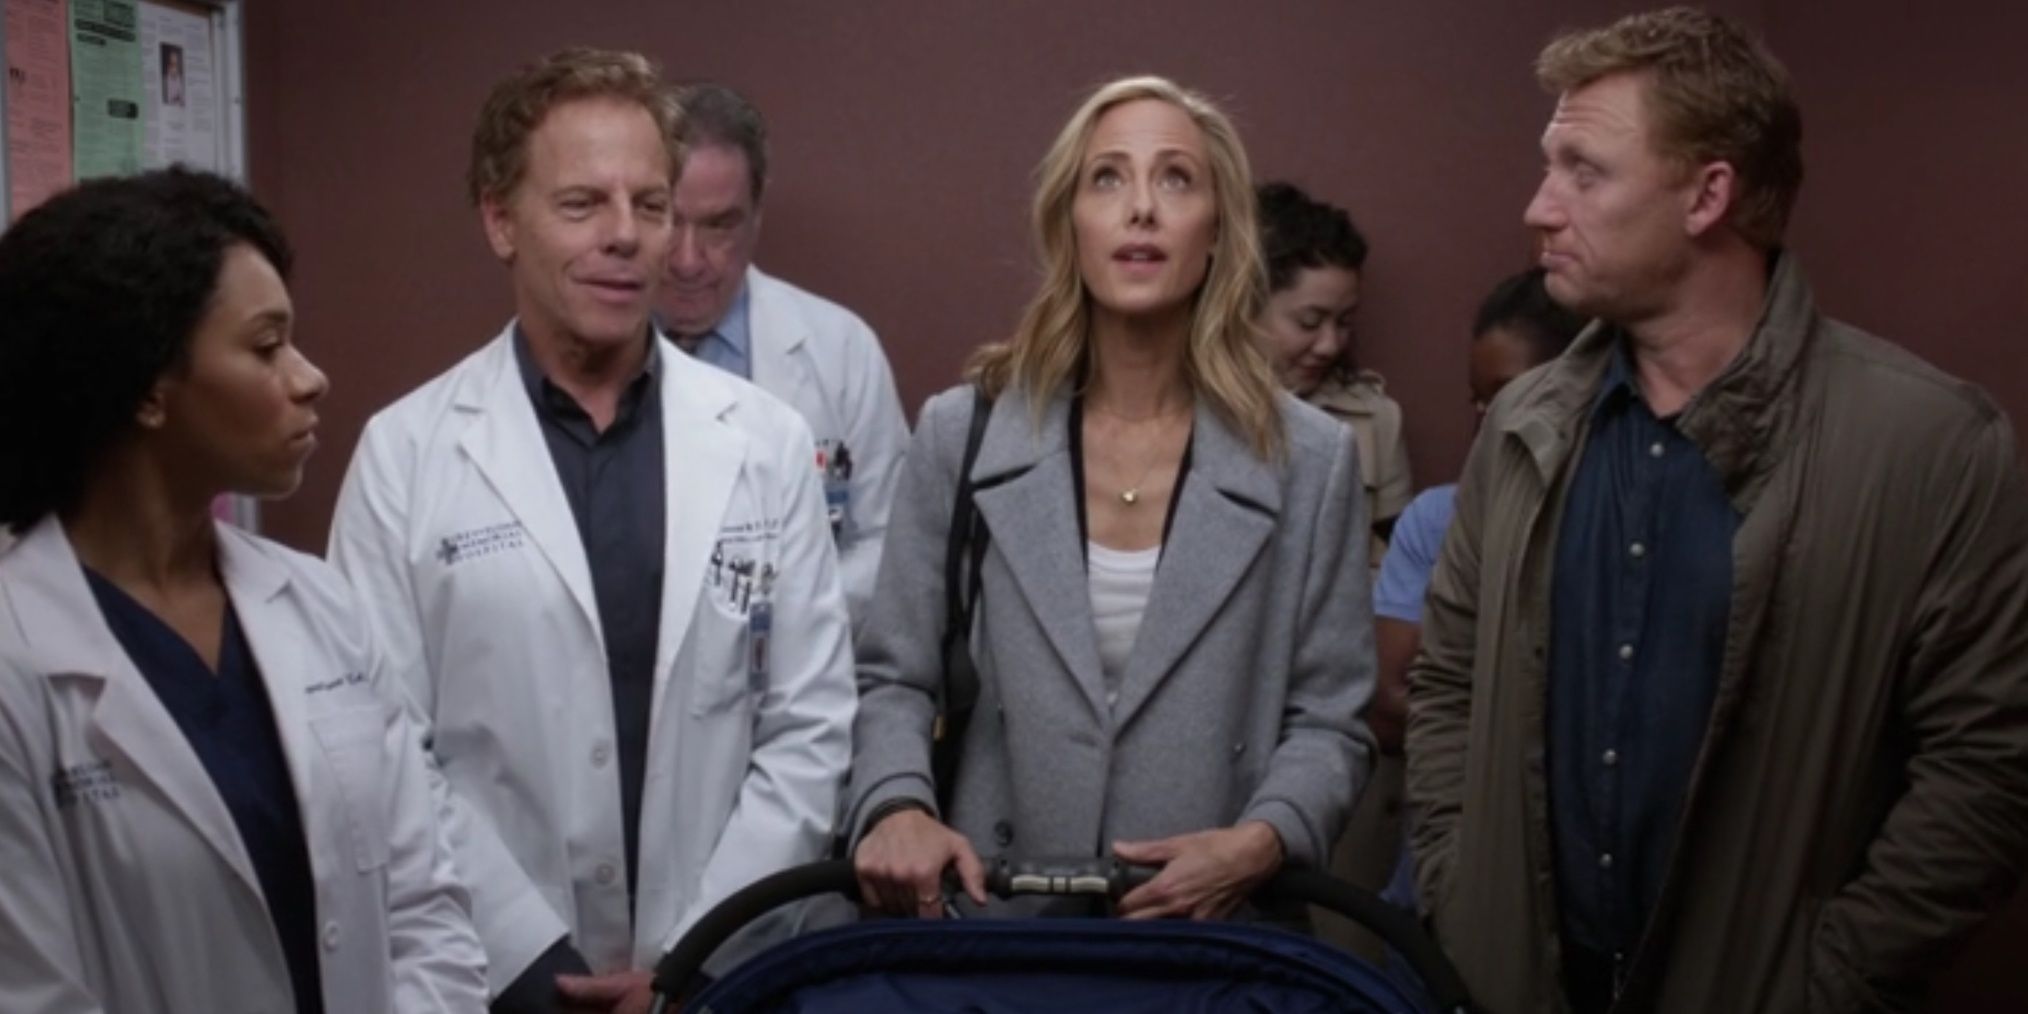 Teddy waits in the elevator with fellow doctors in Grey's Anatomy